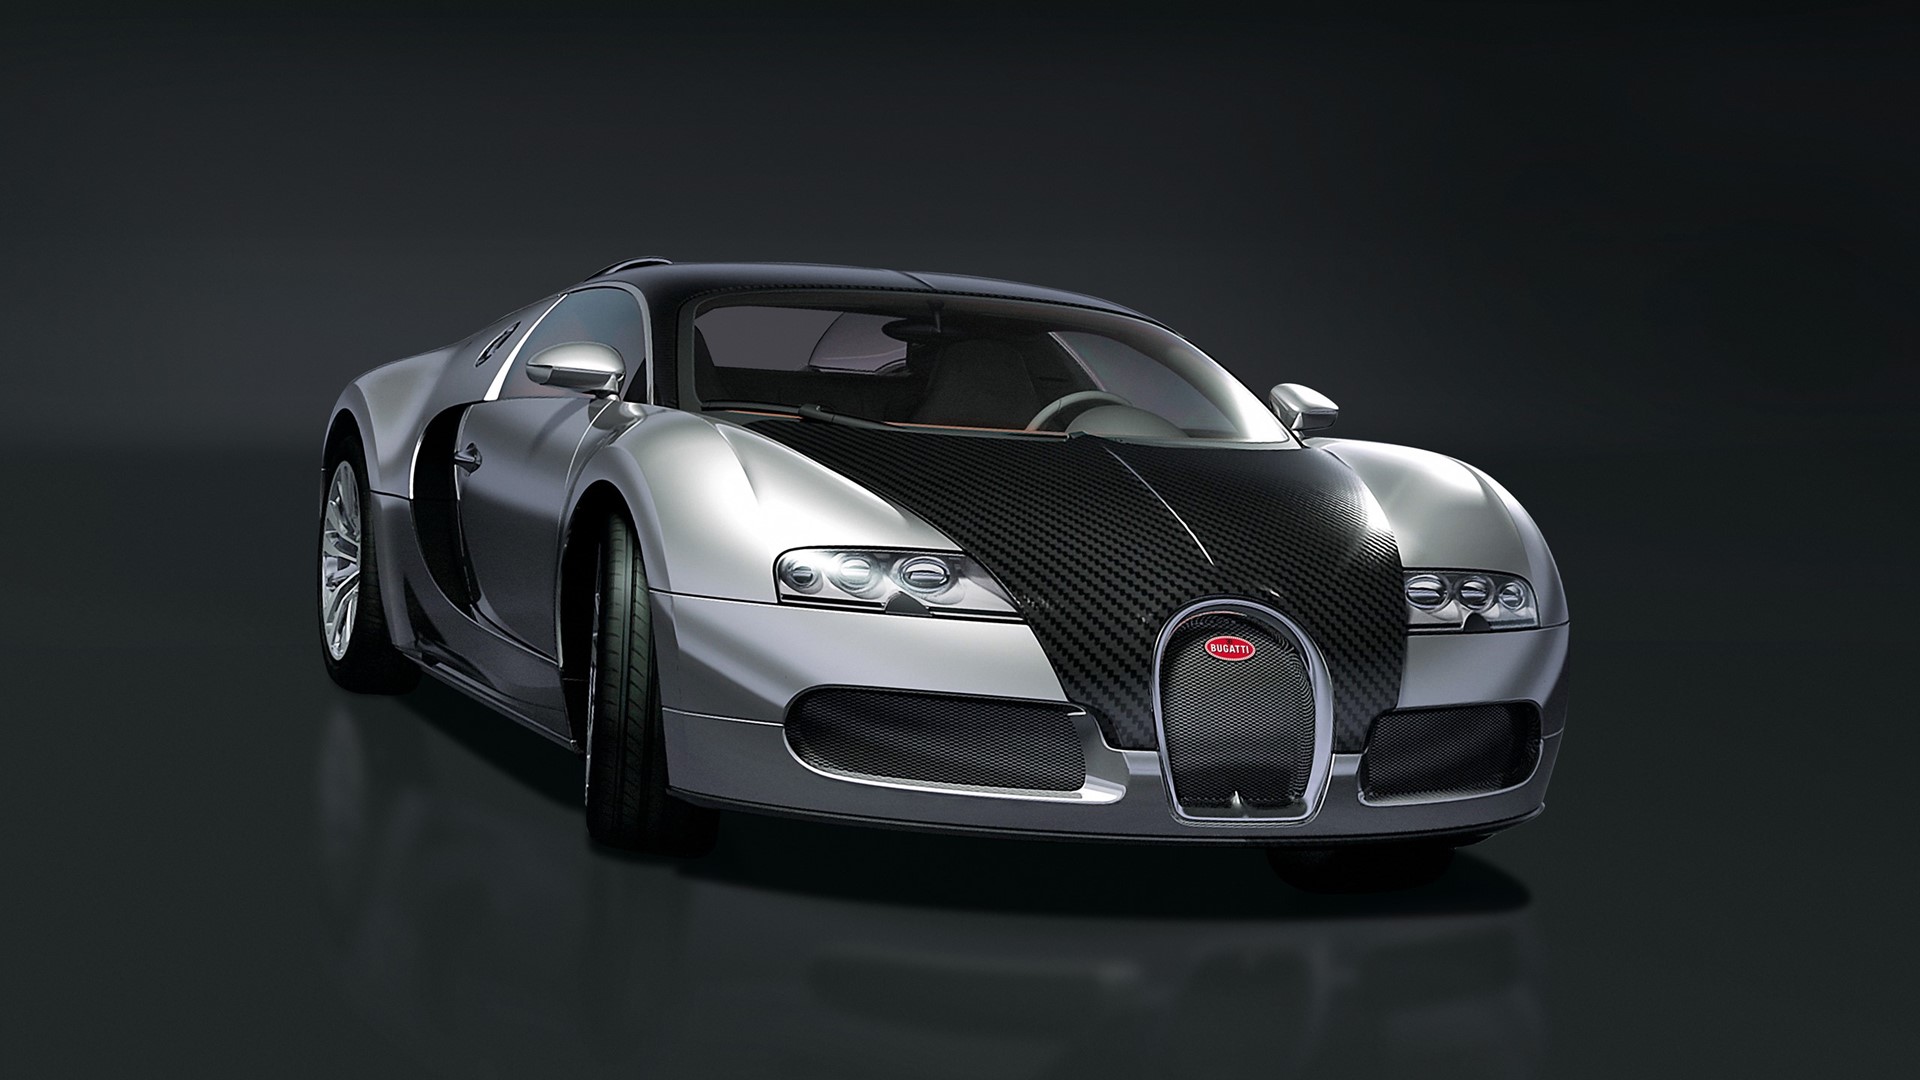 Detail Images Of The Bugatti Veyron Nomer 11